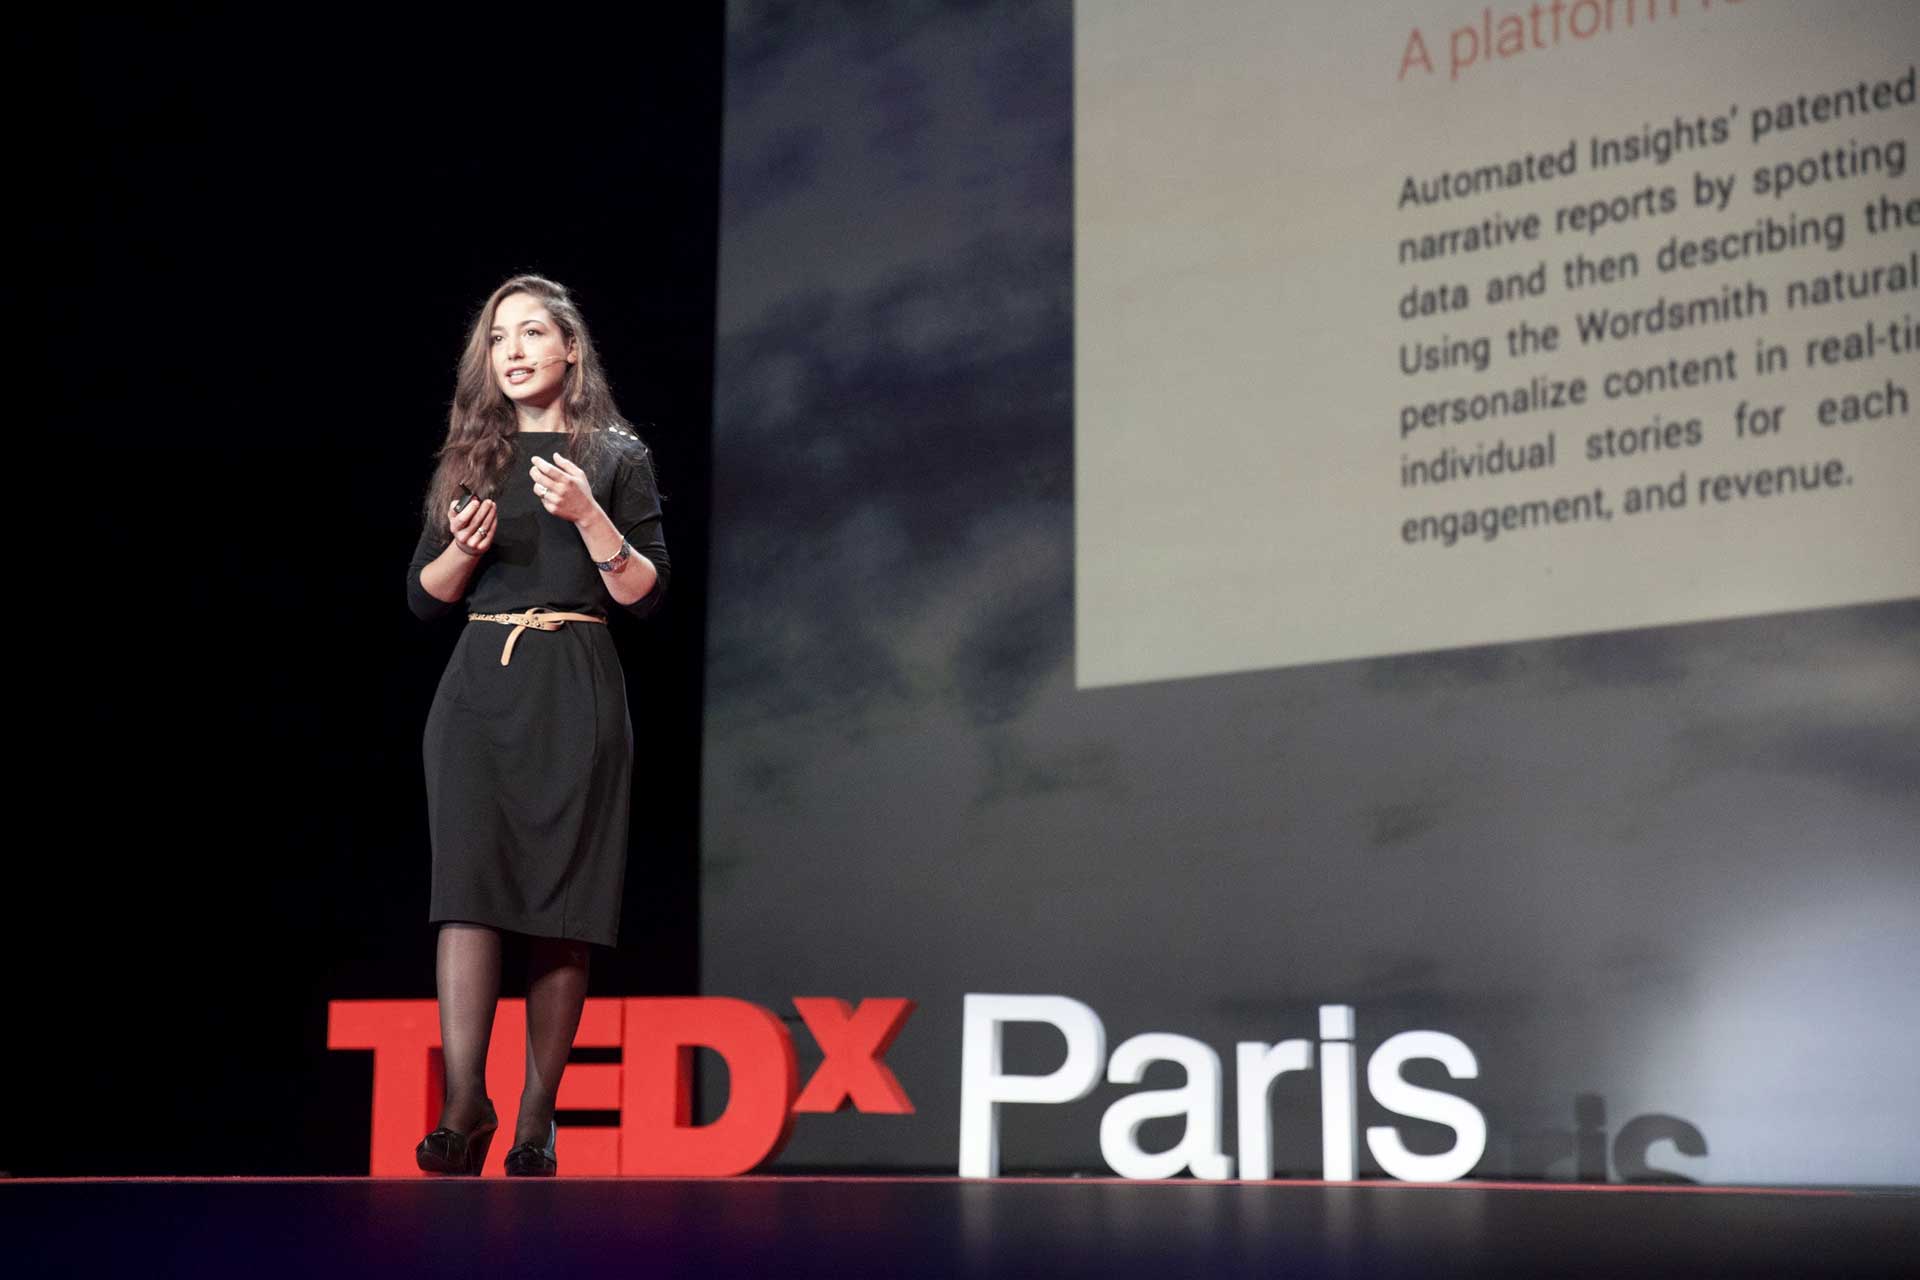 conference-TEDxParis-2014-6.jpg